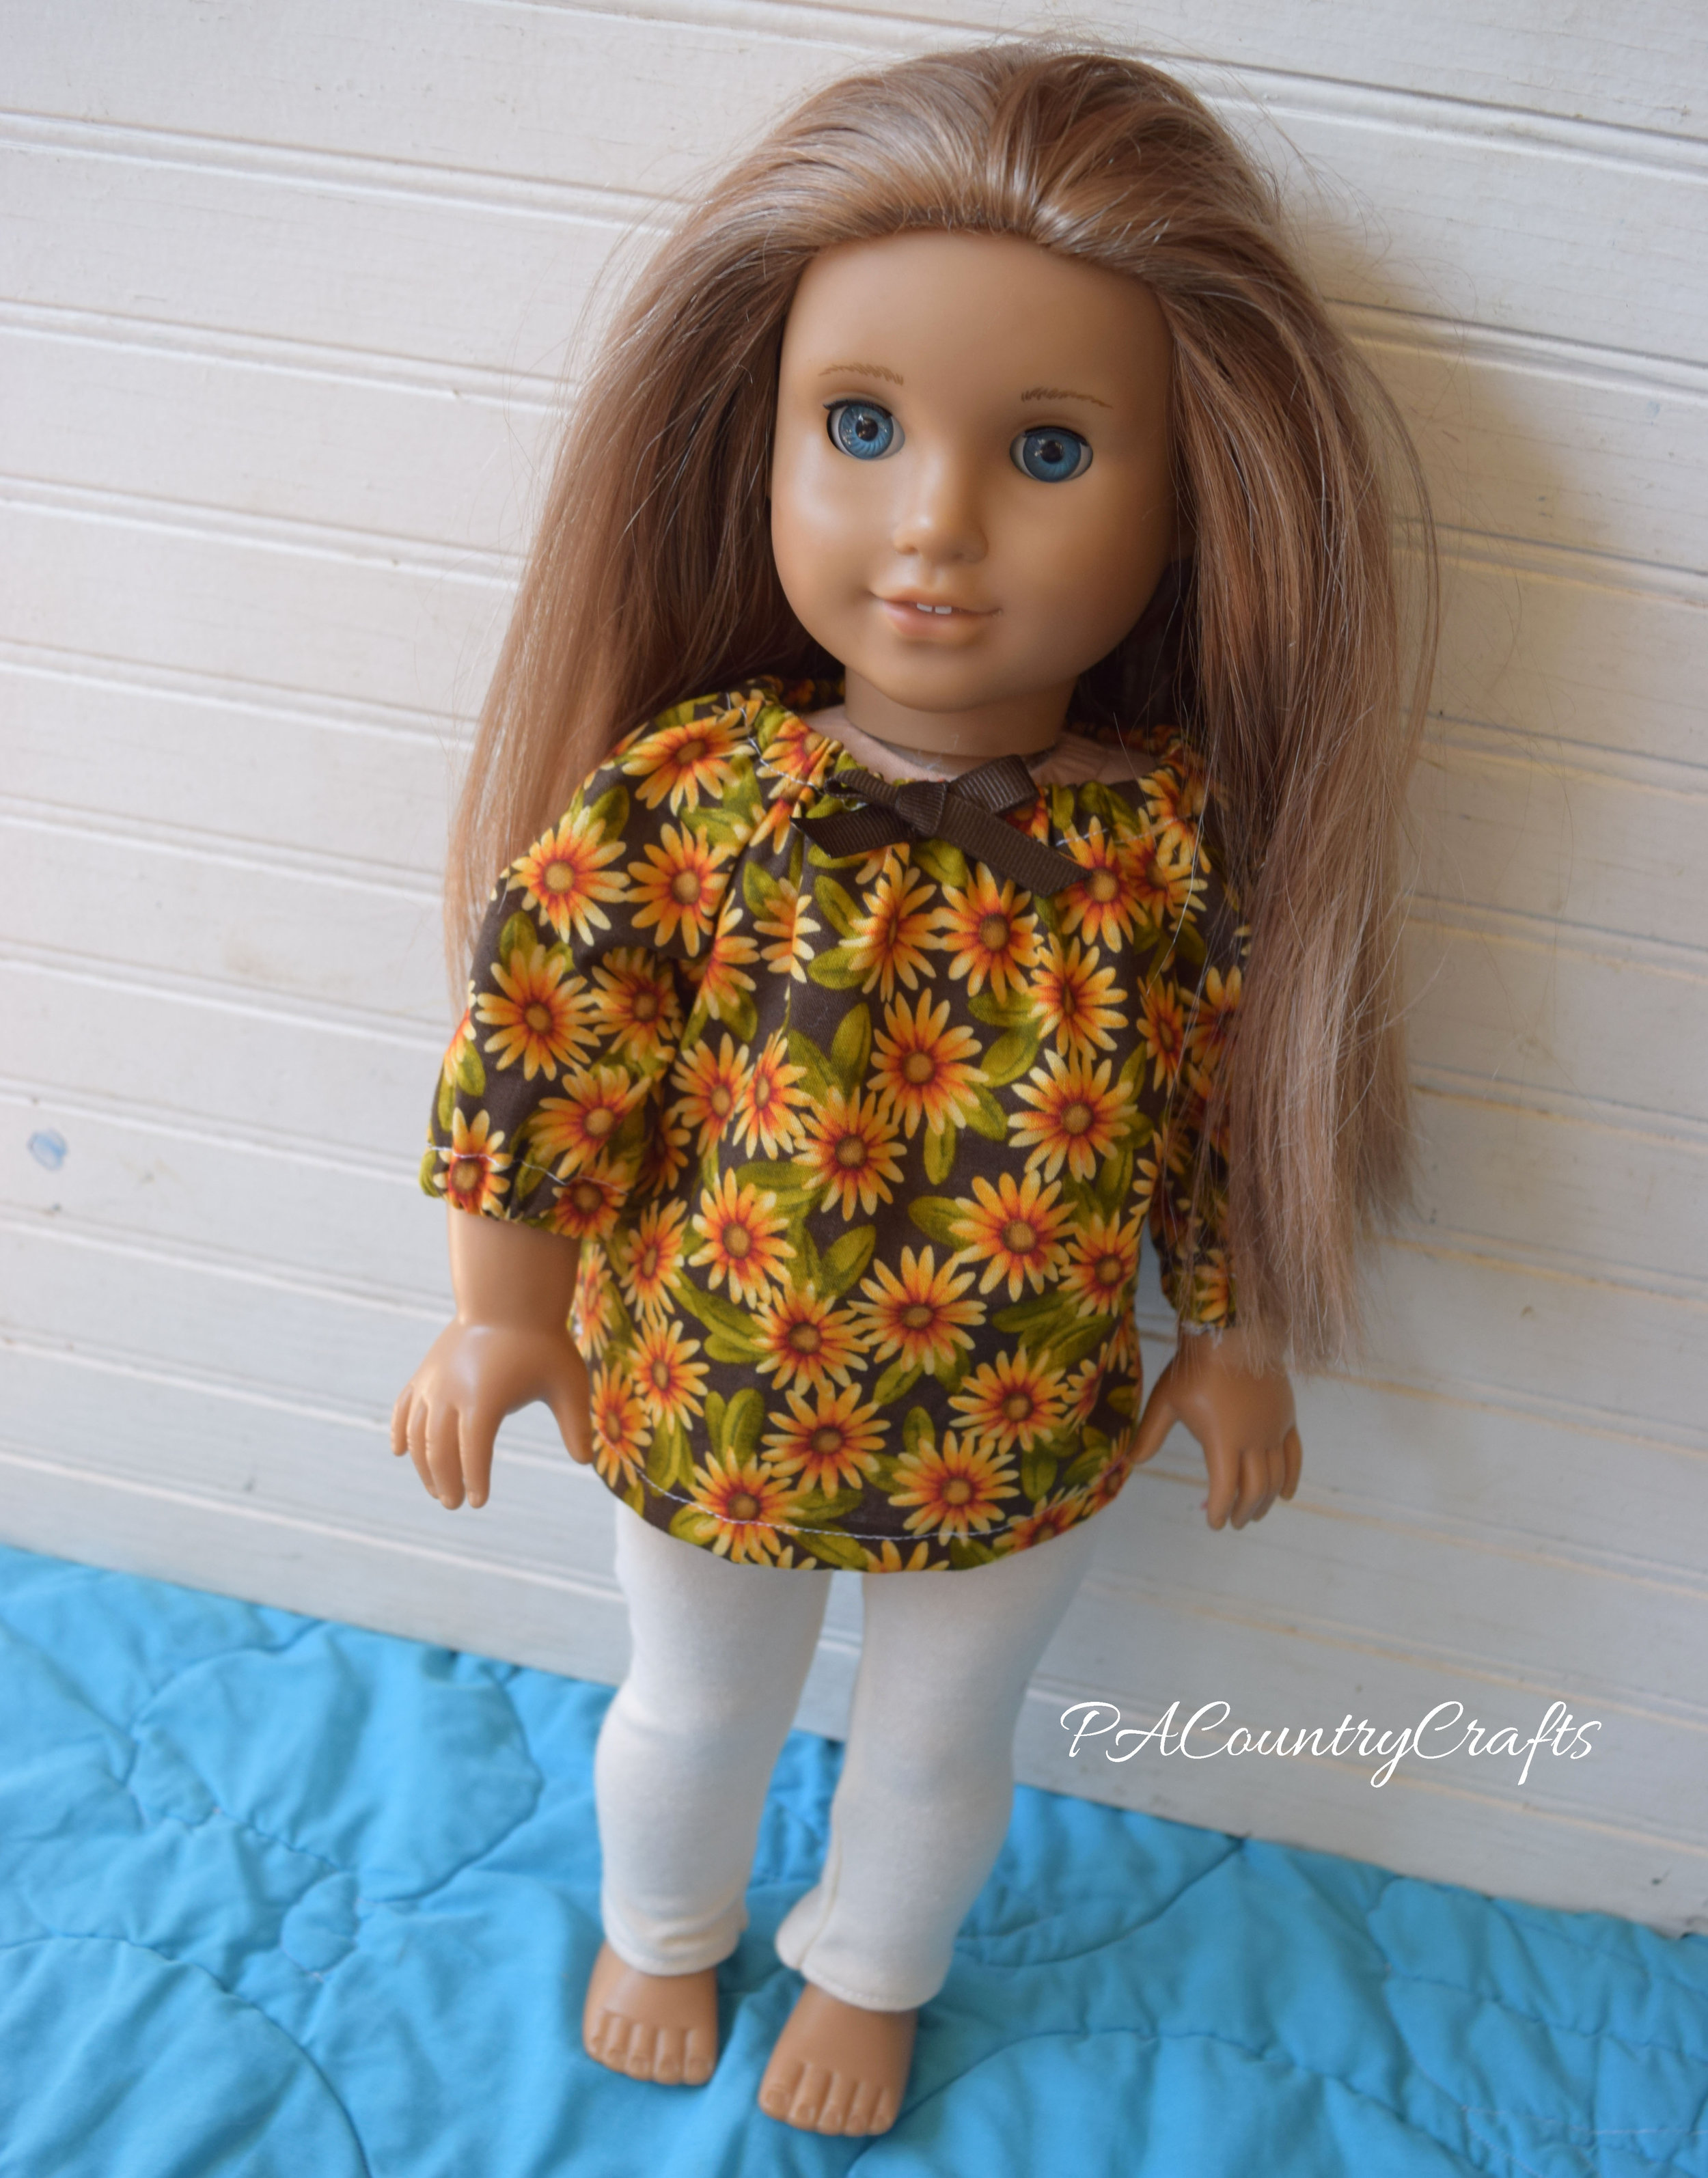 18" doll clothes- sunflower top and leggings